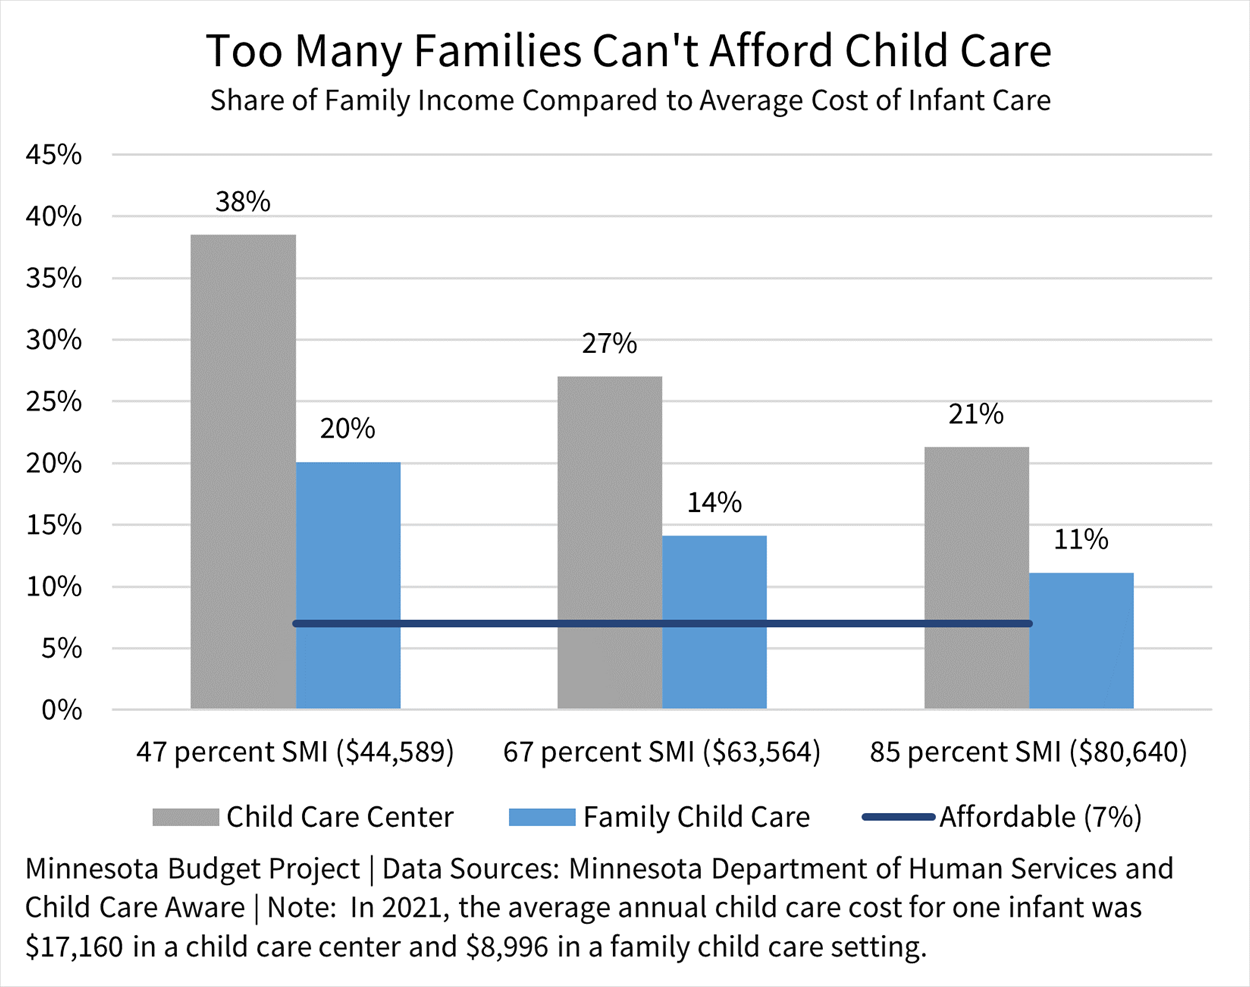 Graph showing the percentage of income paid for center and family child care by income level compared to the affordable rate of 7.5% of income.